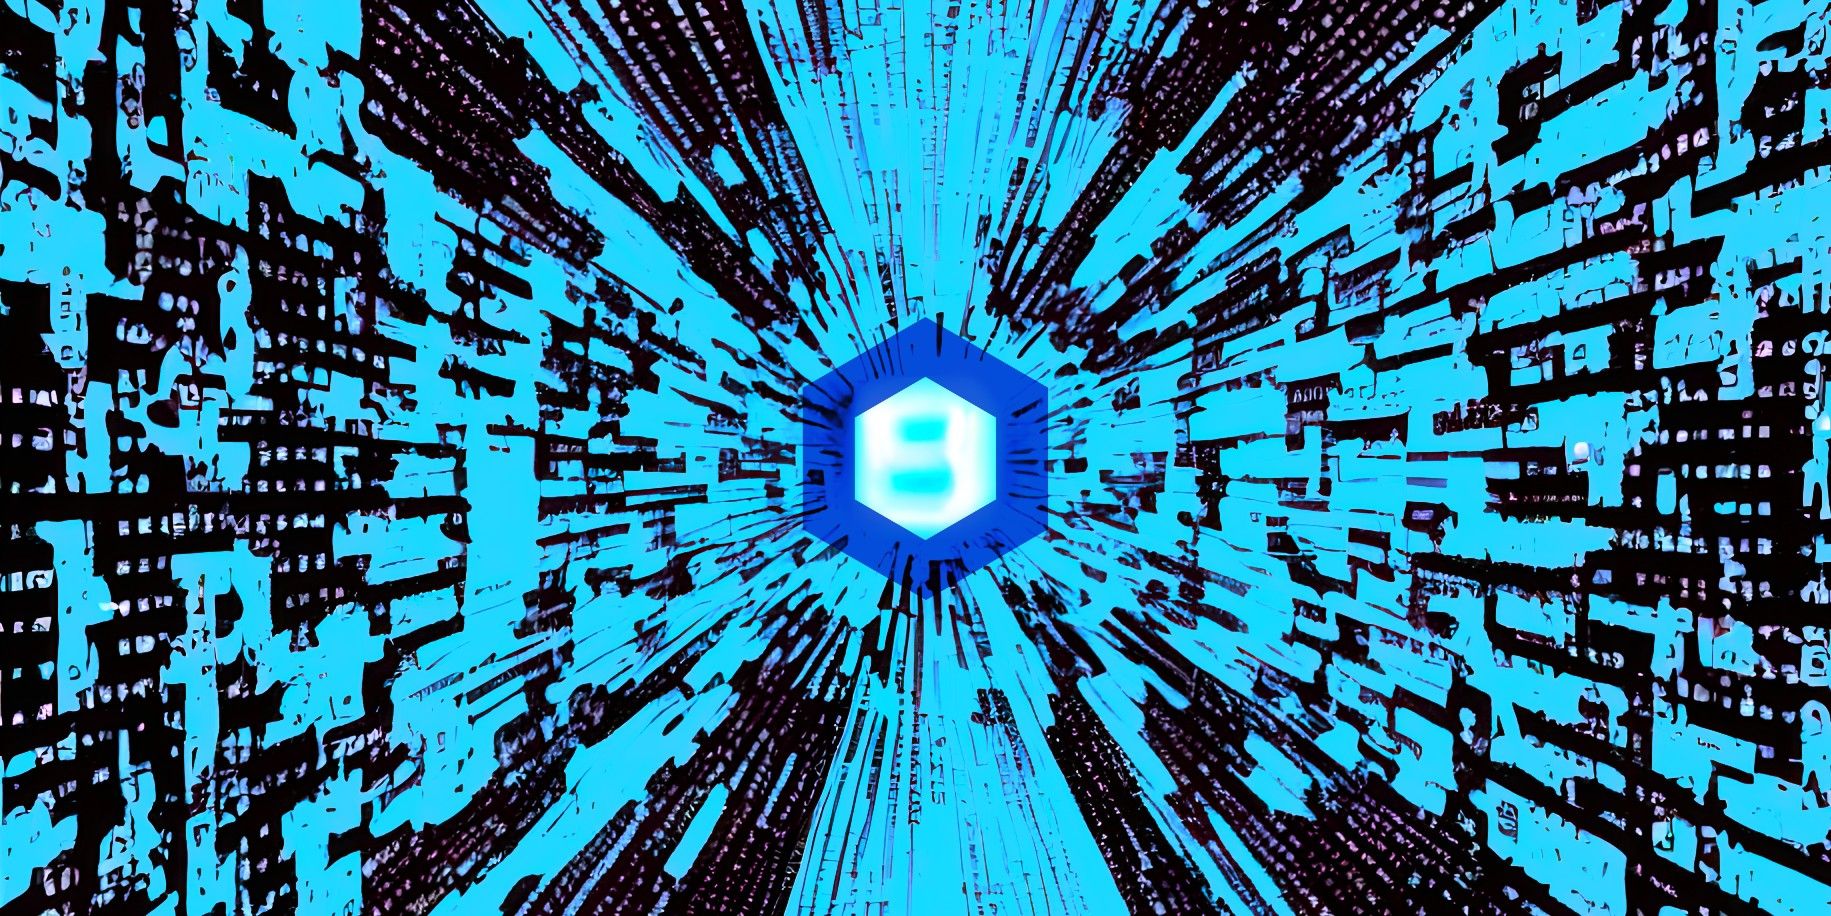 Abstract art of blue data packets flowing from center, with Chainlink logo in center